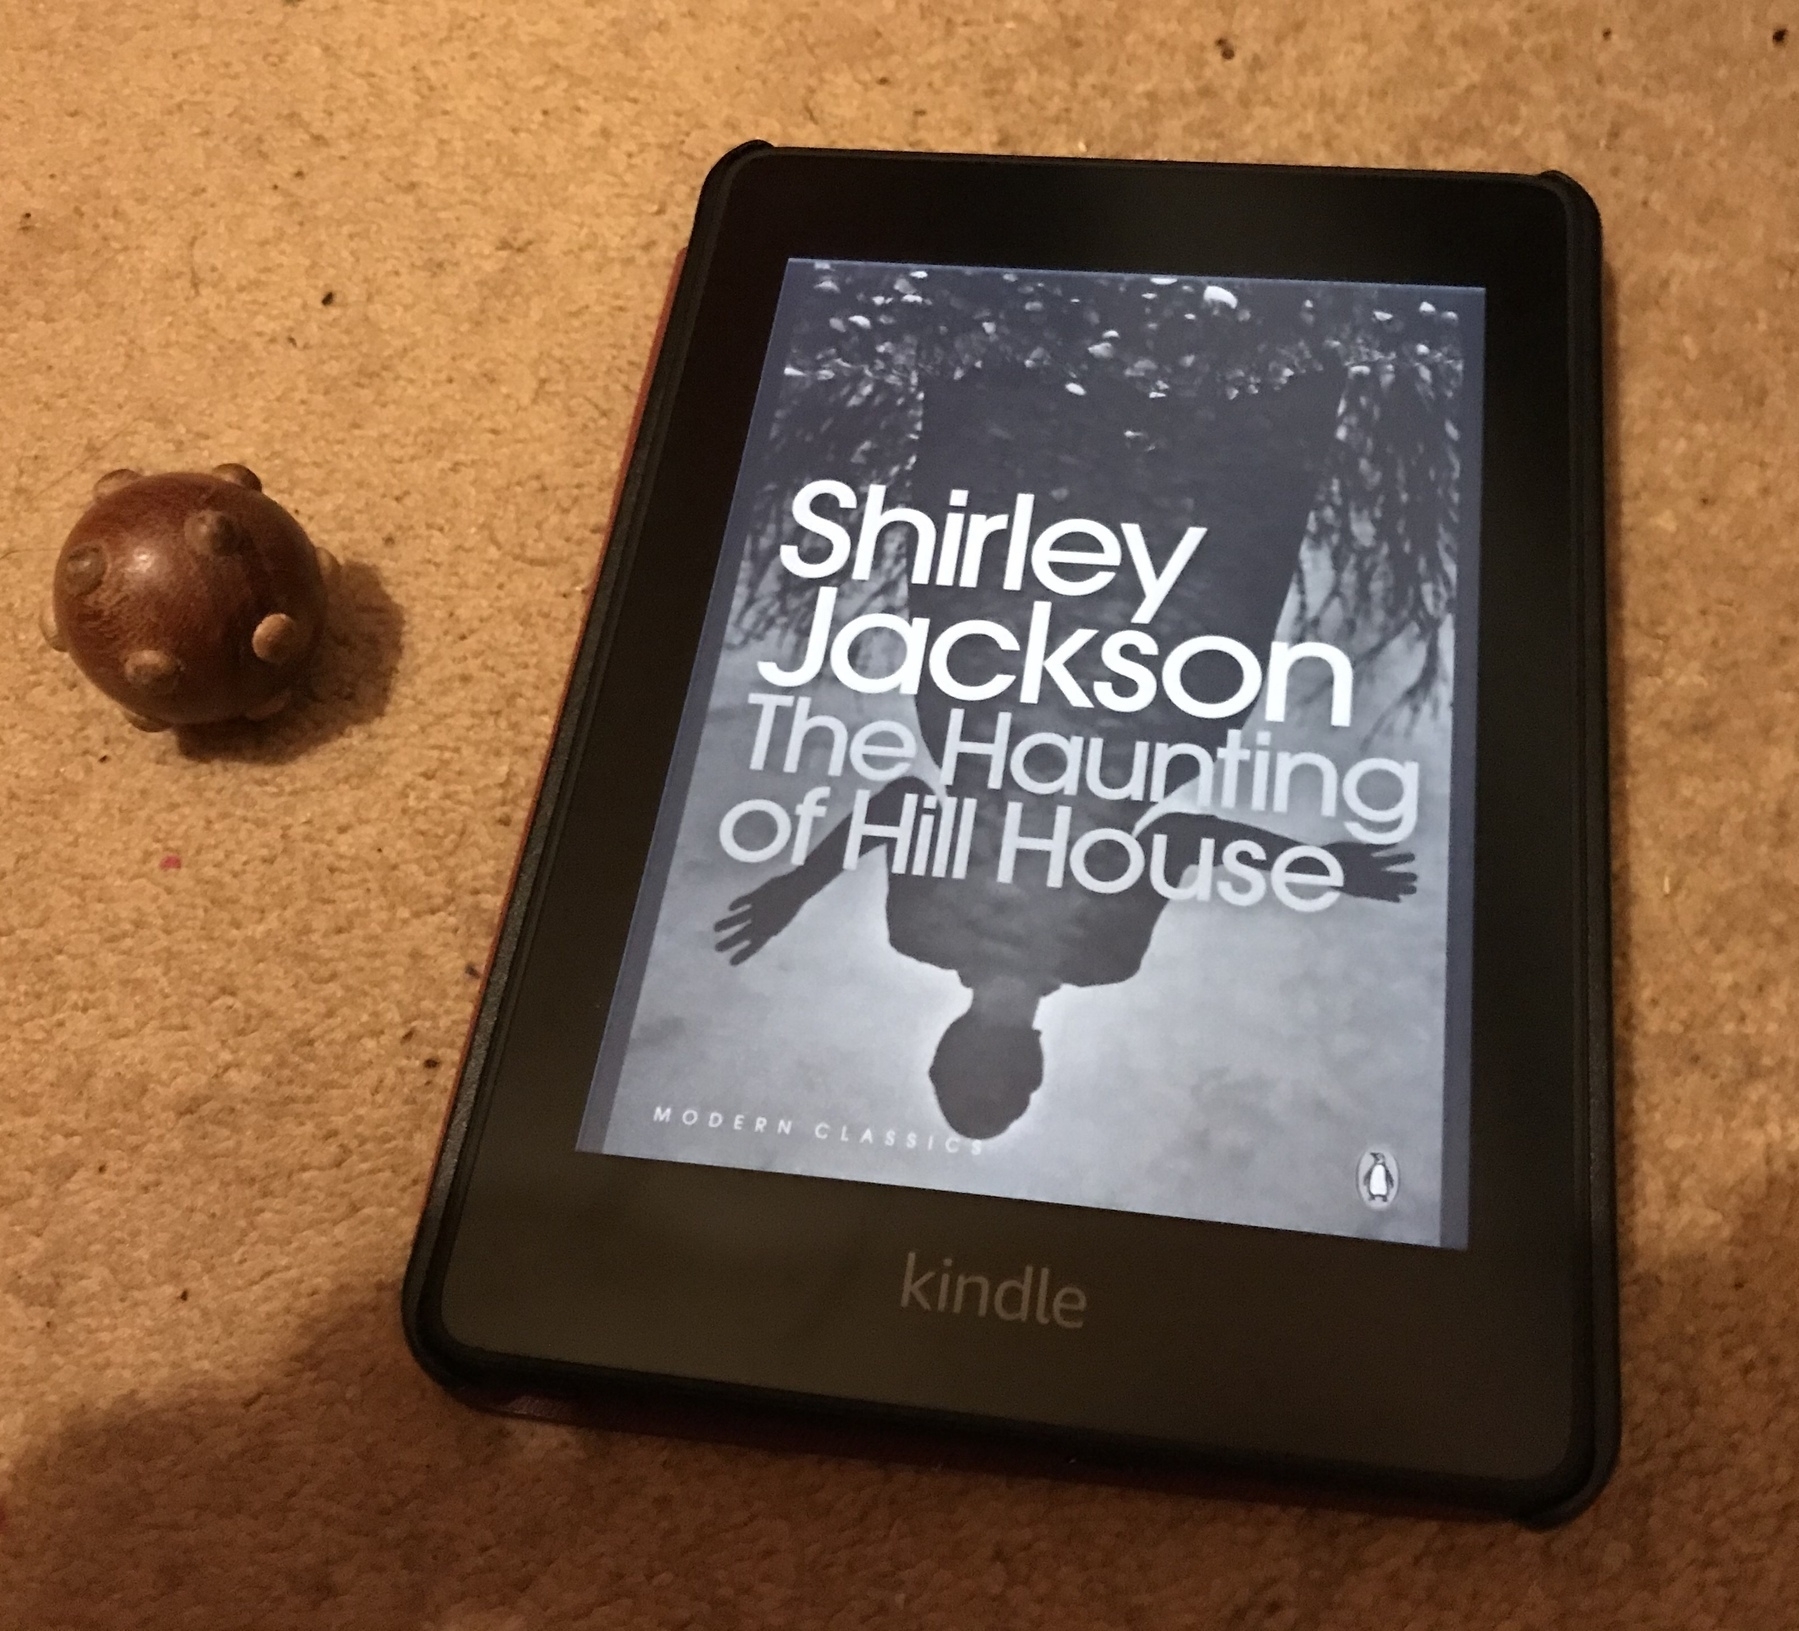 A Kindle showing 'The Haunting of Hill House by Shirley Jackson on its screen